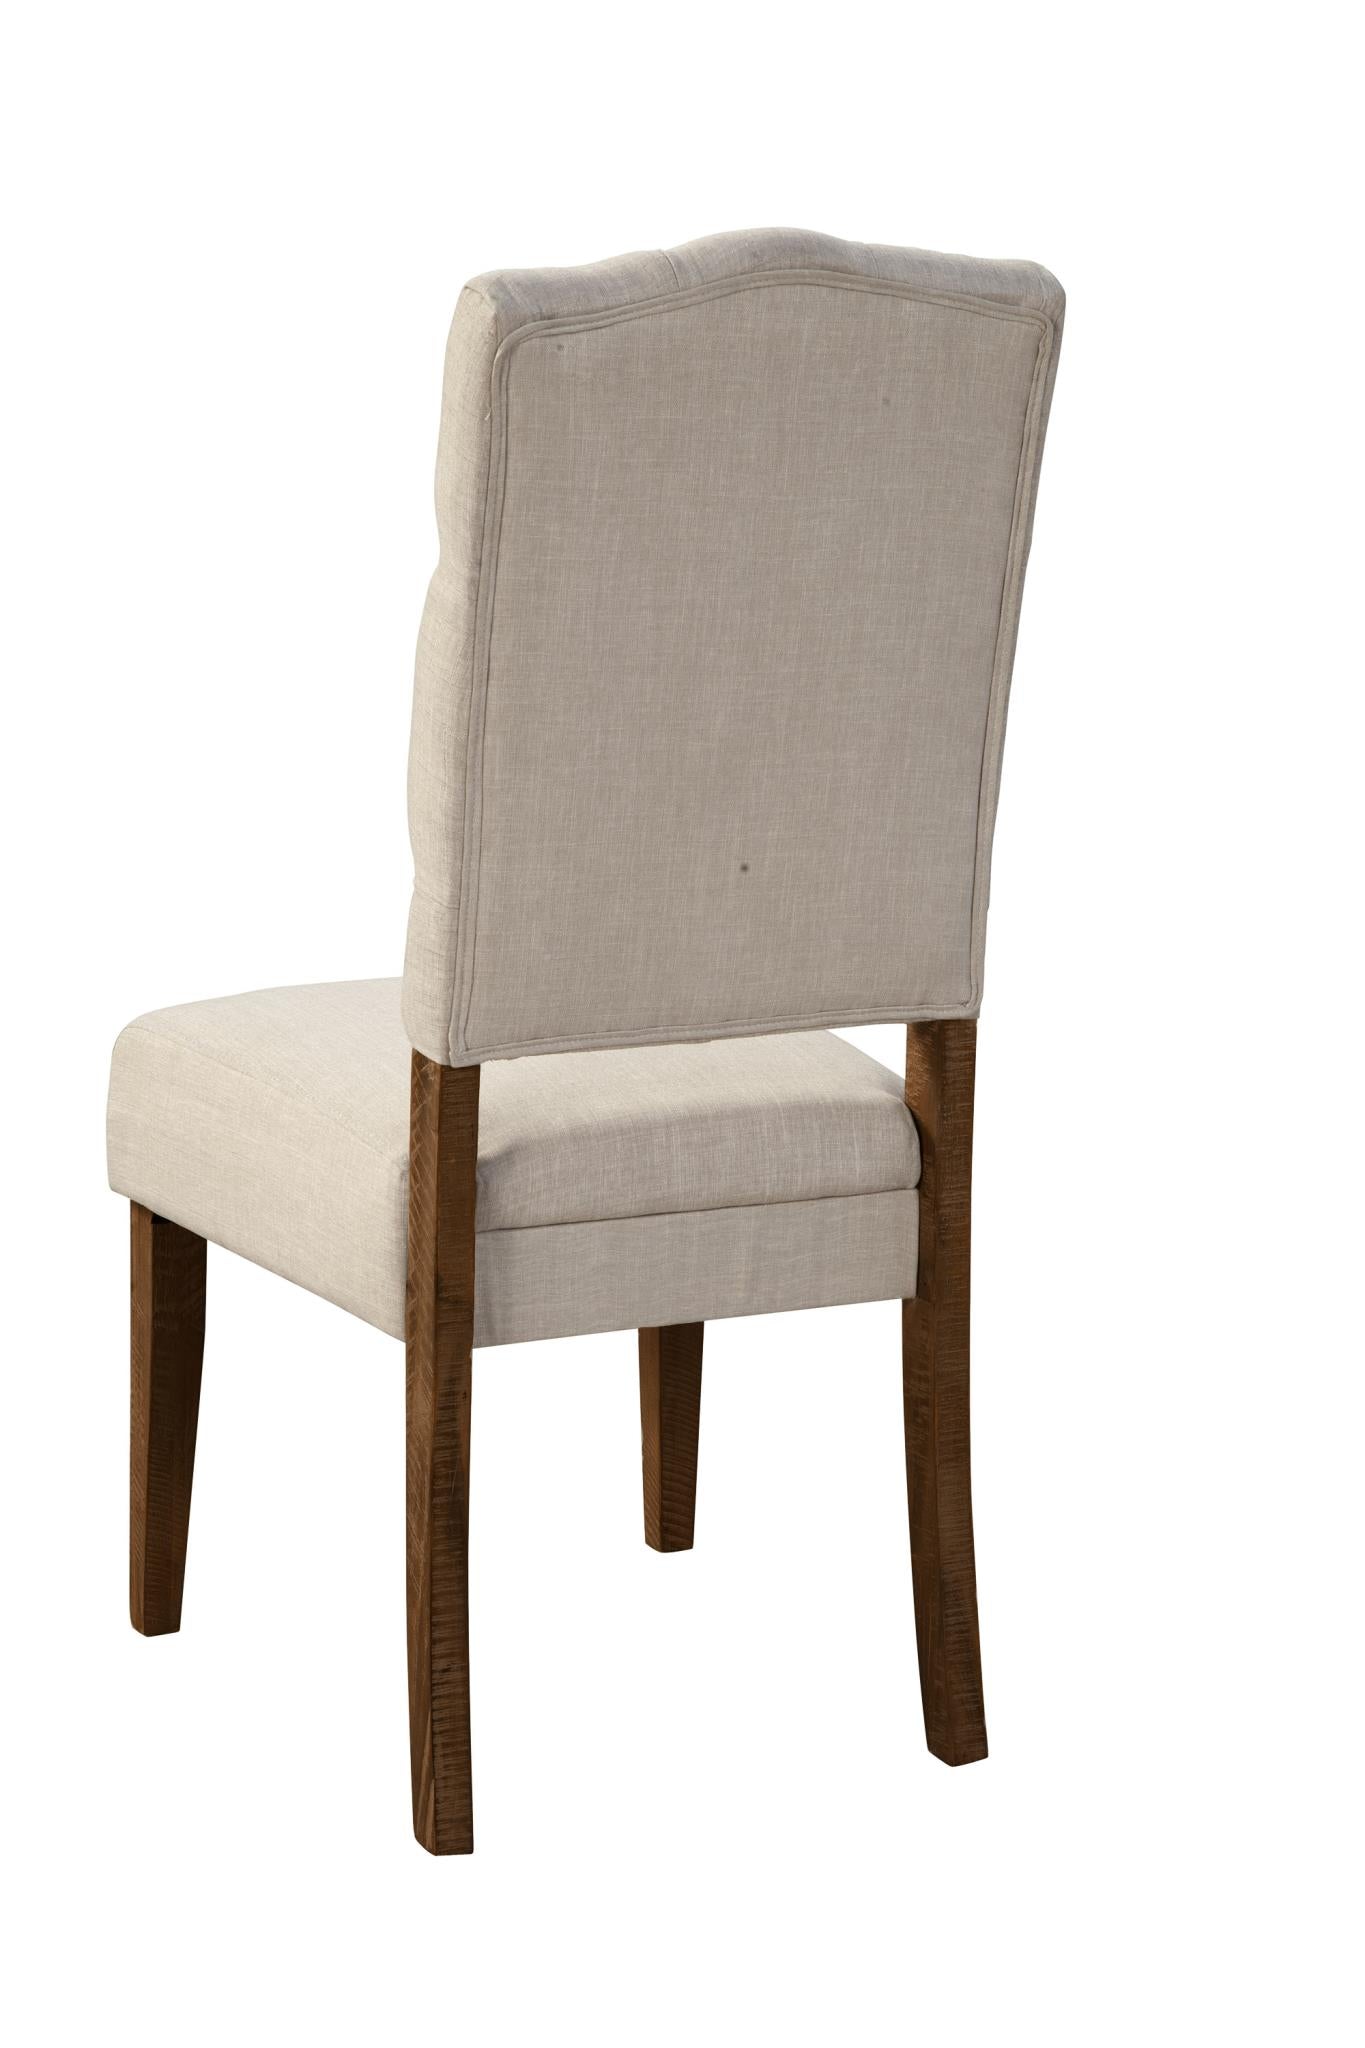 Newberry Upholstered Dining Chair - Beige